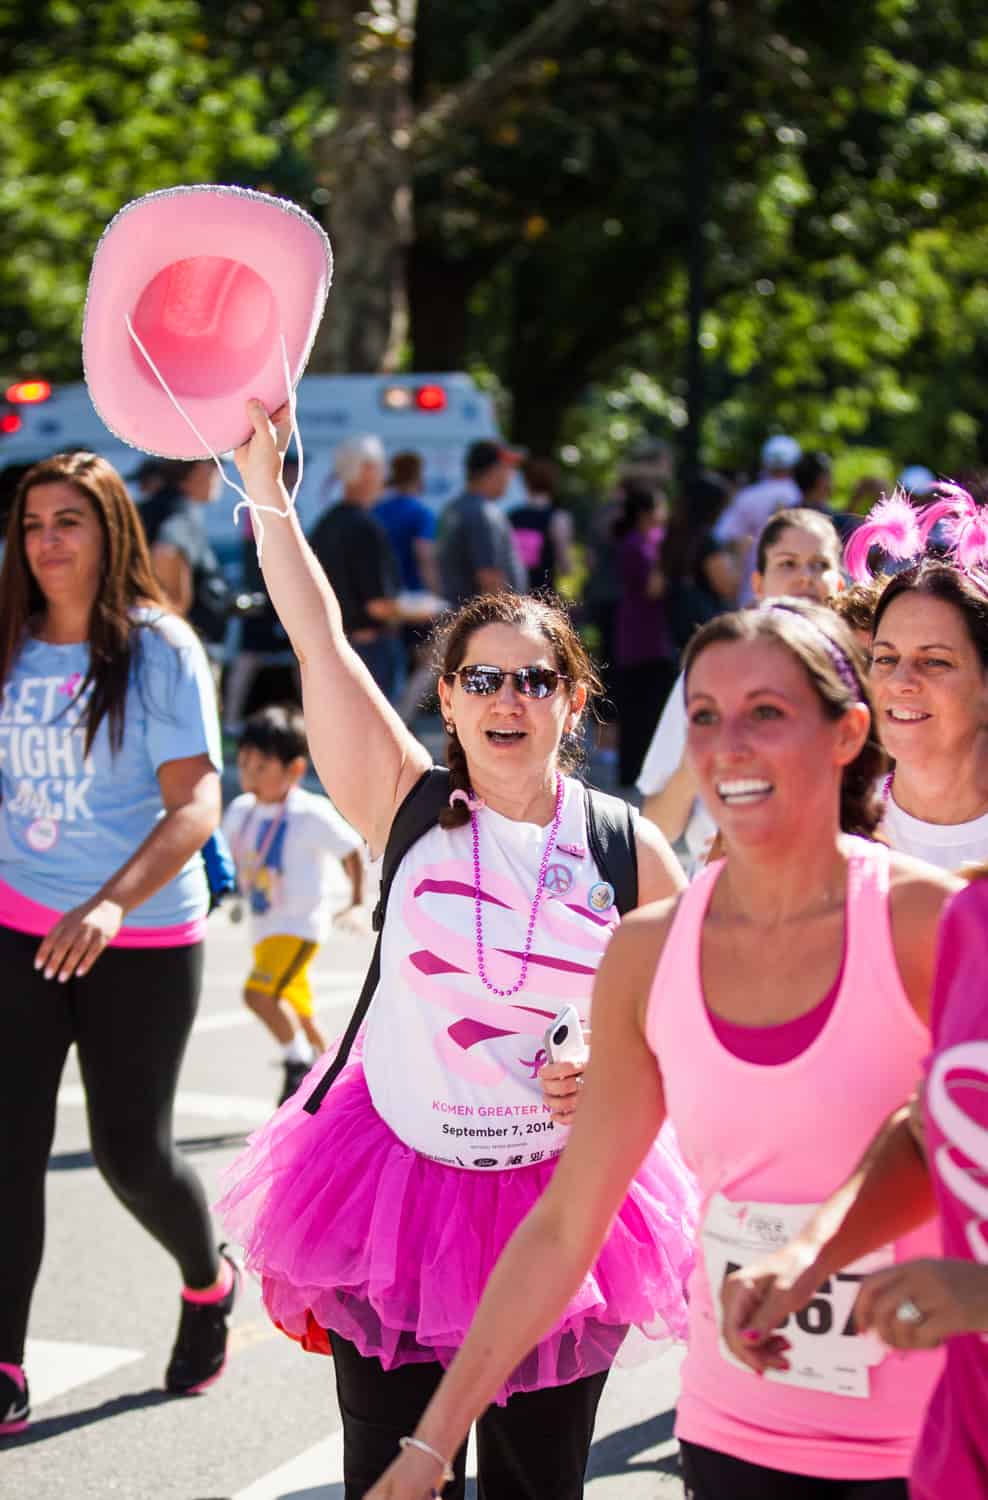 NYC Race for the Cure photos of woman crossing finish line with pink hat in air